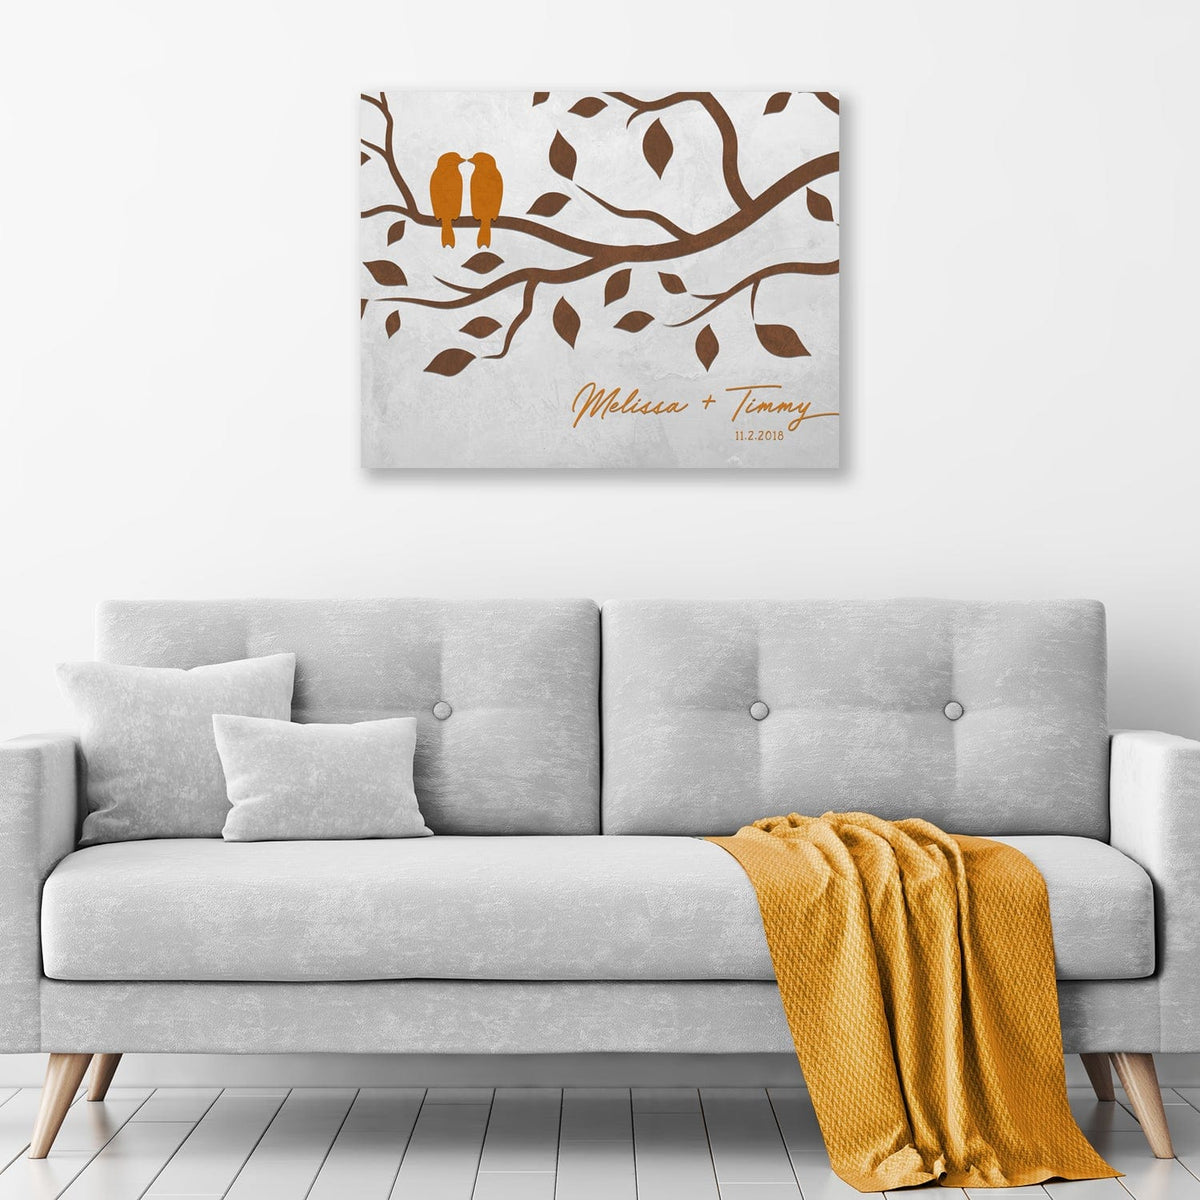 chic decor from personal prints - personalized gifts of art